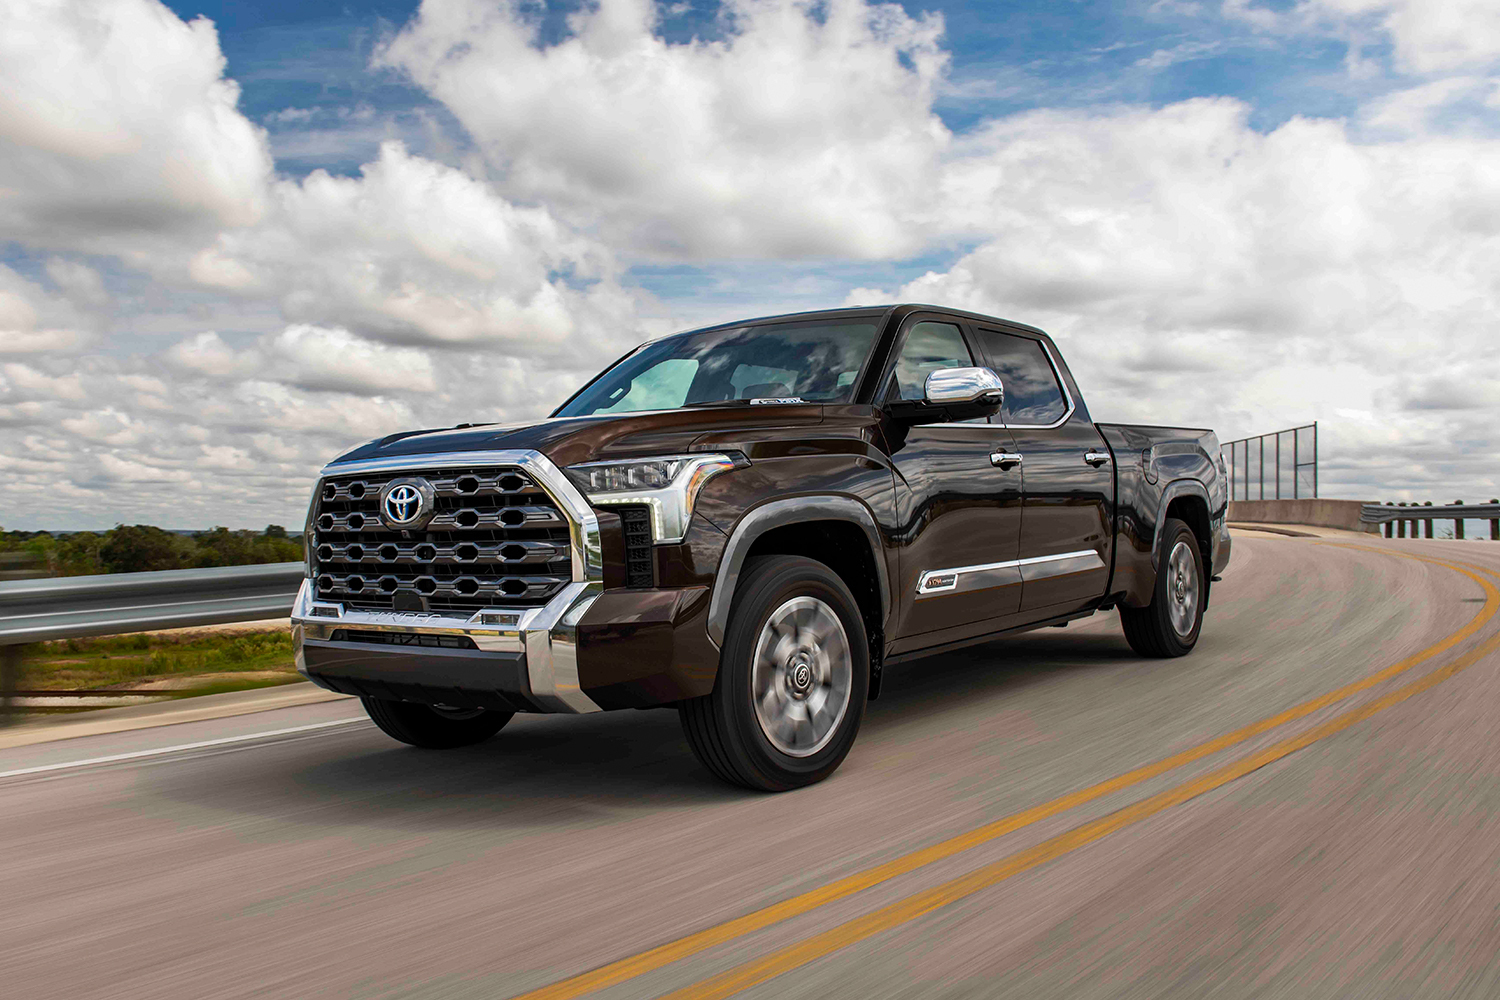 The 2022 Toyota Tundra pickup truck, the 1794 Edition in smoked mesquite brown